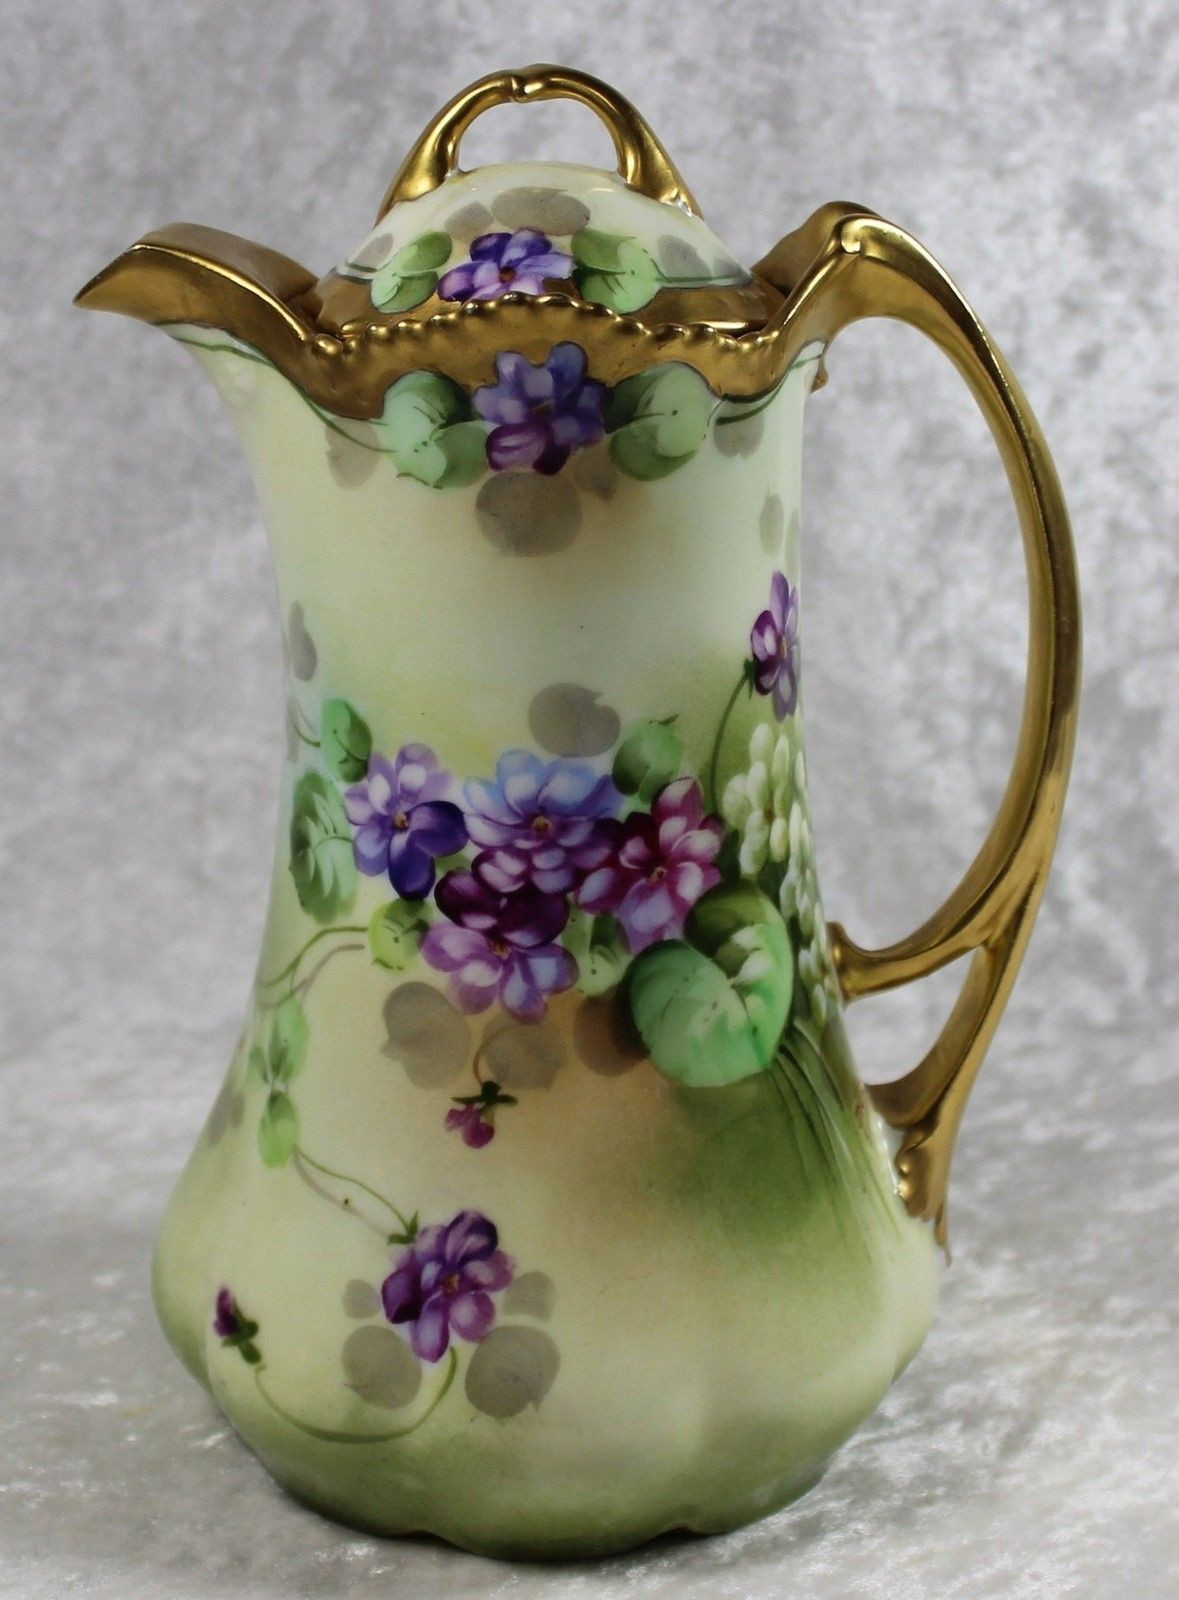 27 Awesome Limoges Vase Prices 2024 free download limoges vase prices of pickard limoges porcelain france coffee pot handpainted in pickard limoges porcelain france coffee pot handpainted 1179x1600